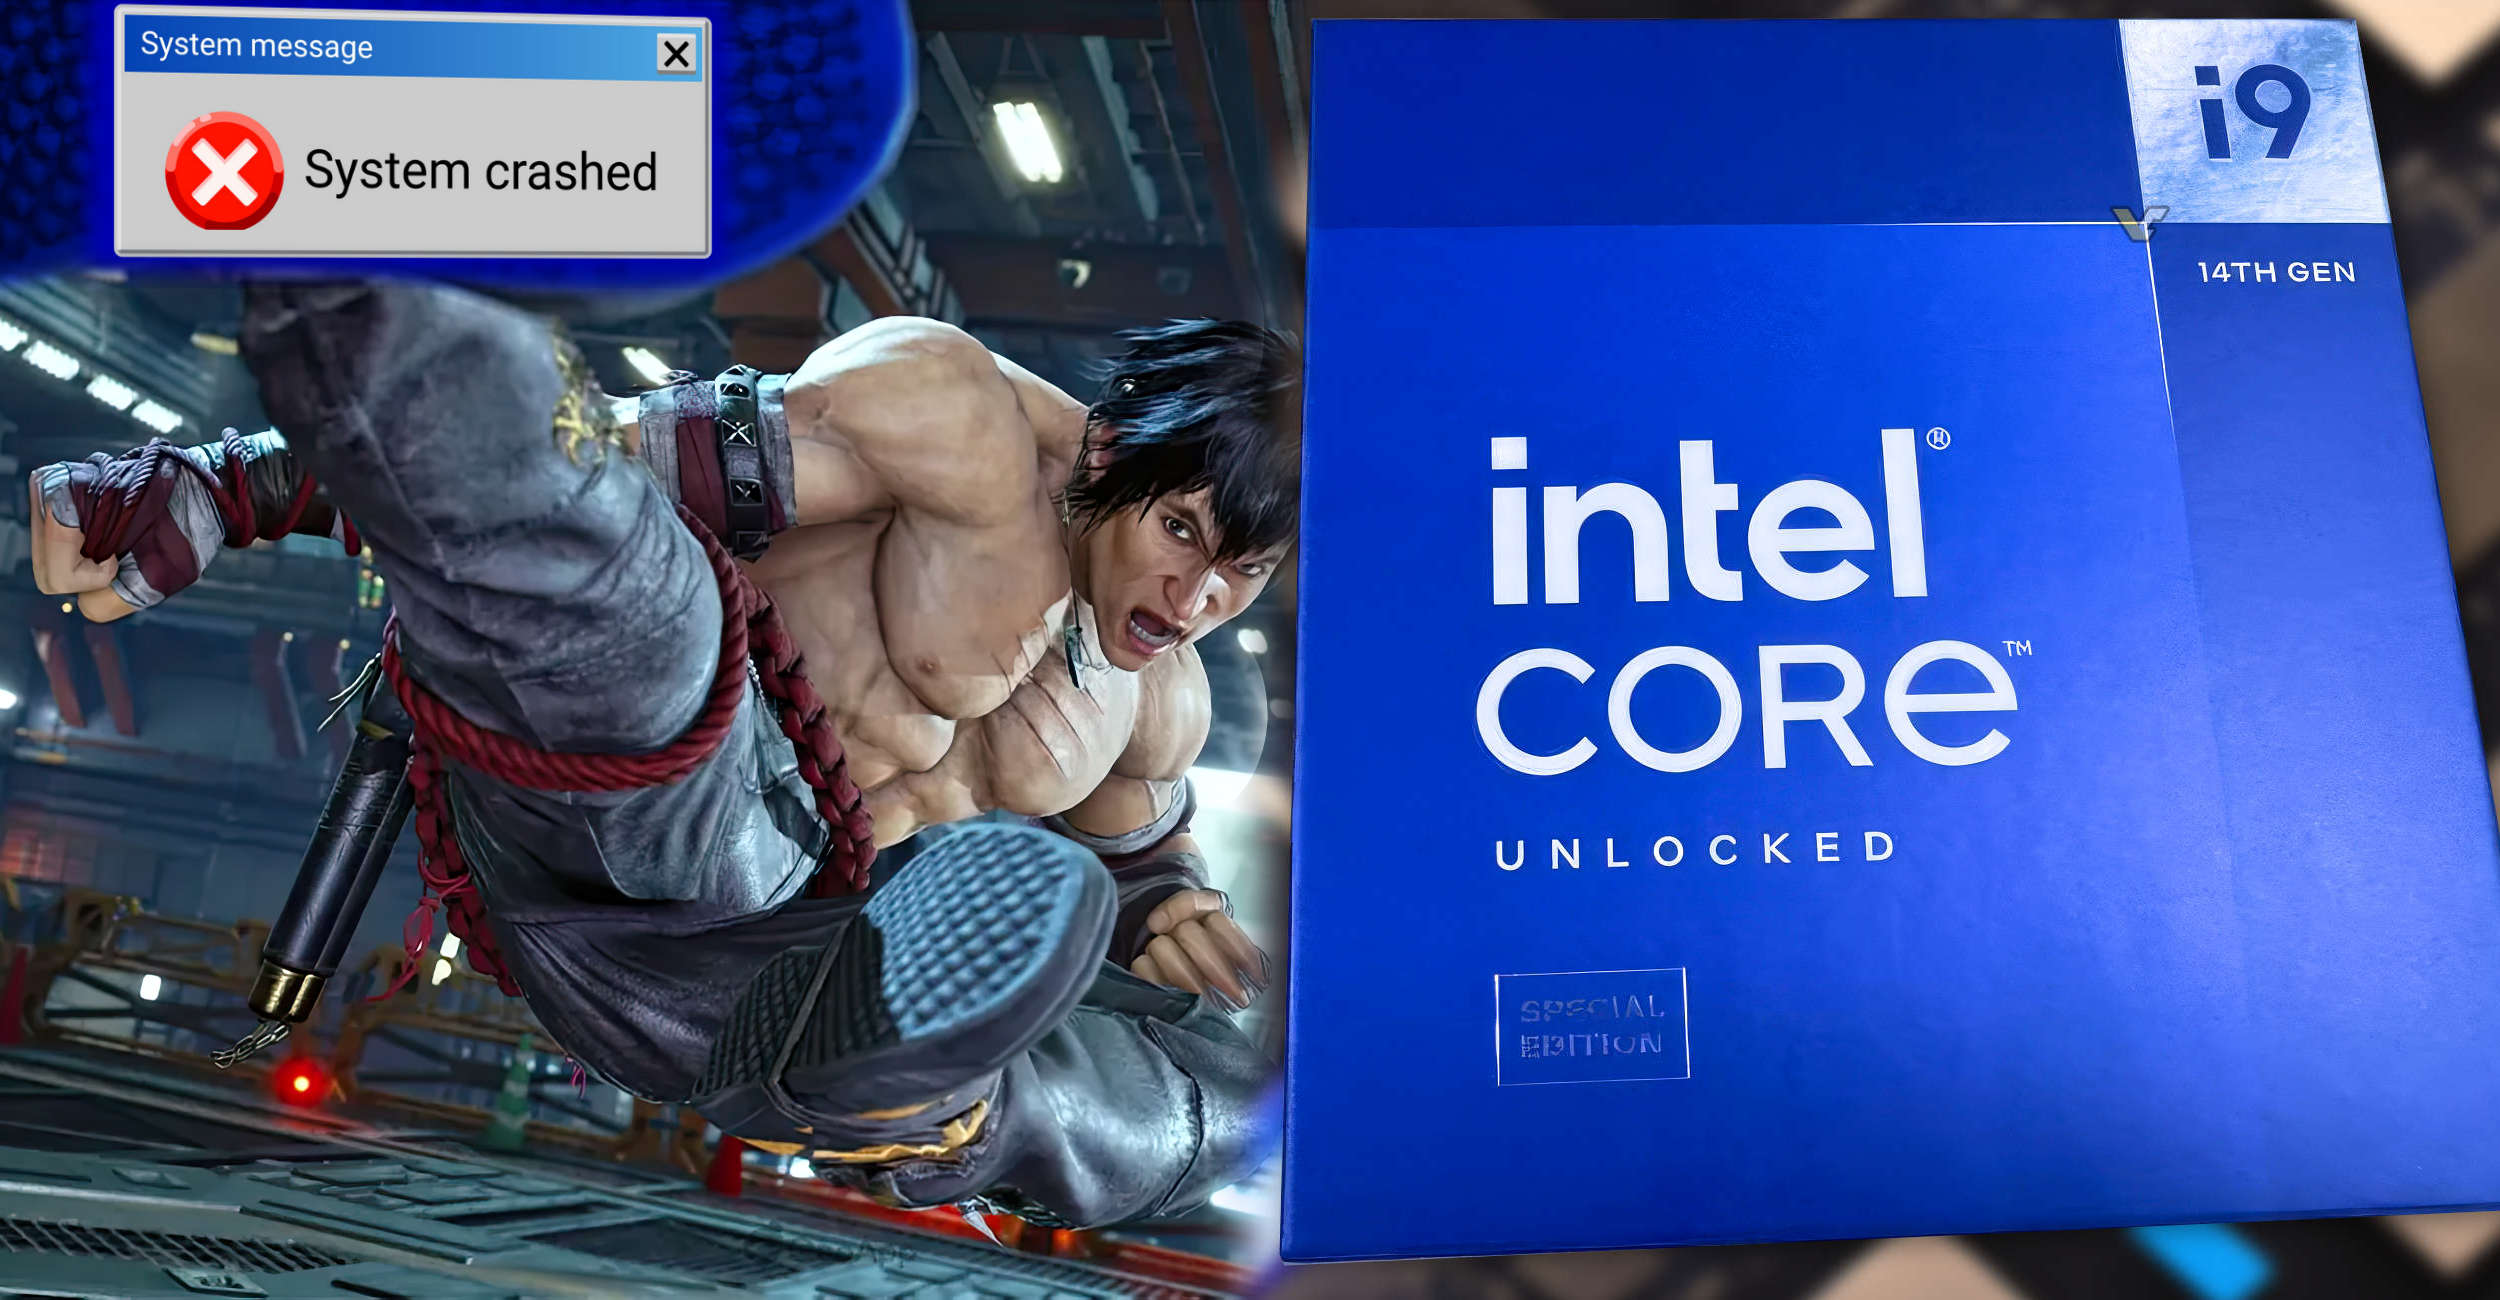 Tekken 8 instability issues on Intel 13/14th Gen Core series sparks investigation South Korean media report that Intel is now investigating the problem of Raptor Lake CPU crashes.  According to ZDNET Korea, Intel is now investigating the issue related to gaming instability as observed in games like Tekken 8. While similar issues were reported by […]